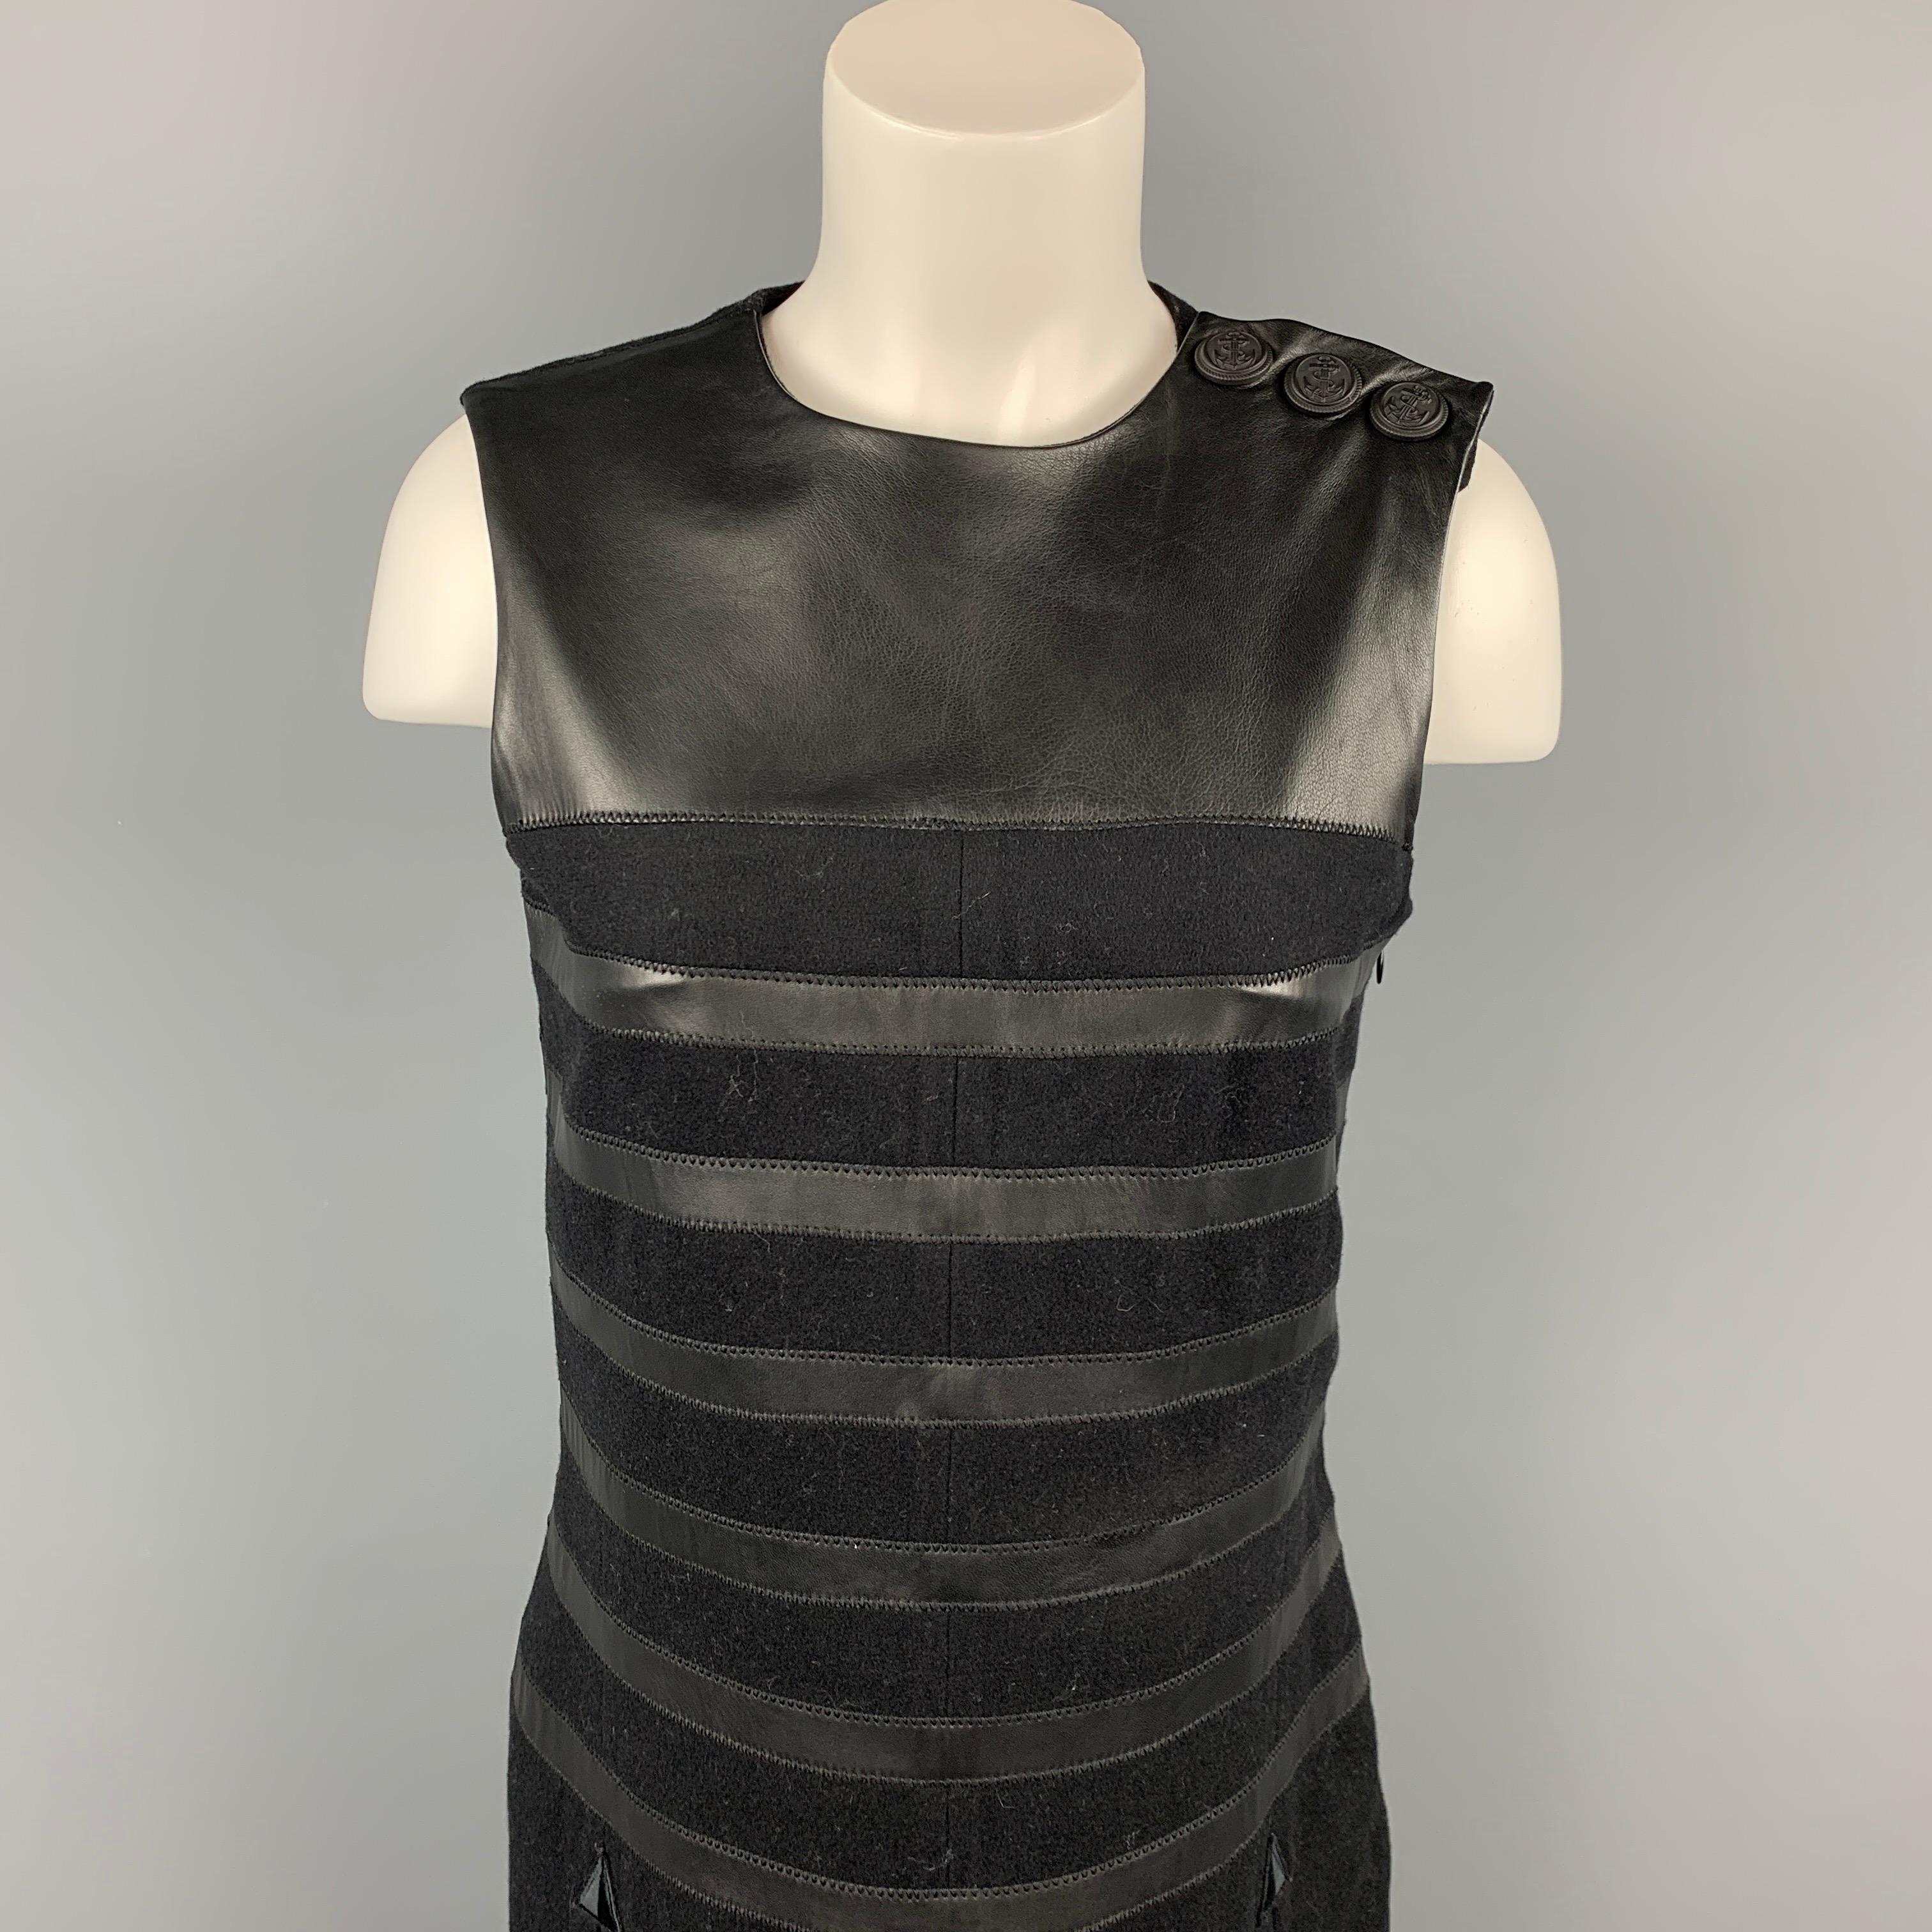 GAULTIER 2 dress comes in a black virgin wool featuring a shift style, leather trim, slit pockets, front & back slits, three detail, and a side zipper closure. Made in Italy.

Very Good Pre-Owned Condition.
Marked: I 42 / D 38 / F 38 / GB 10 / USA